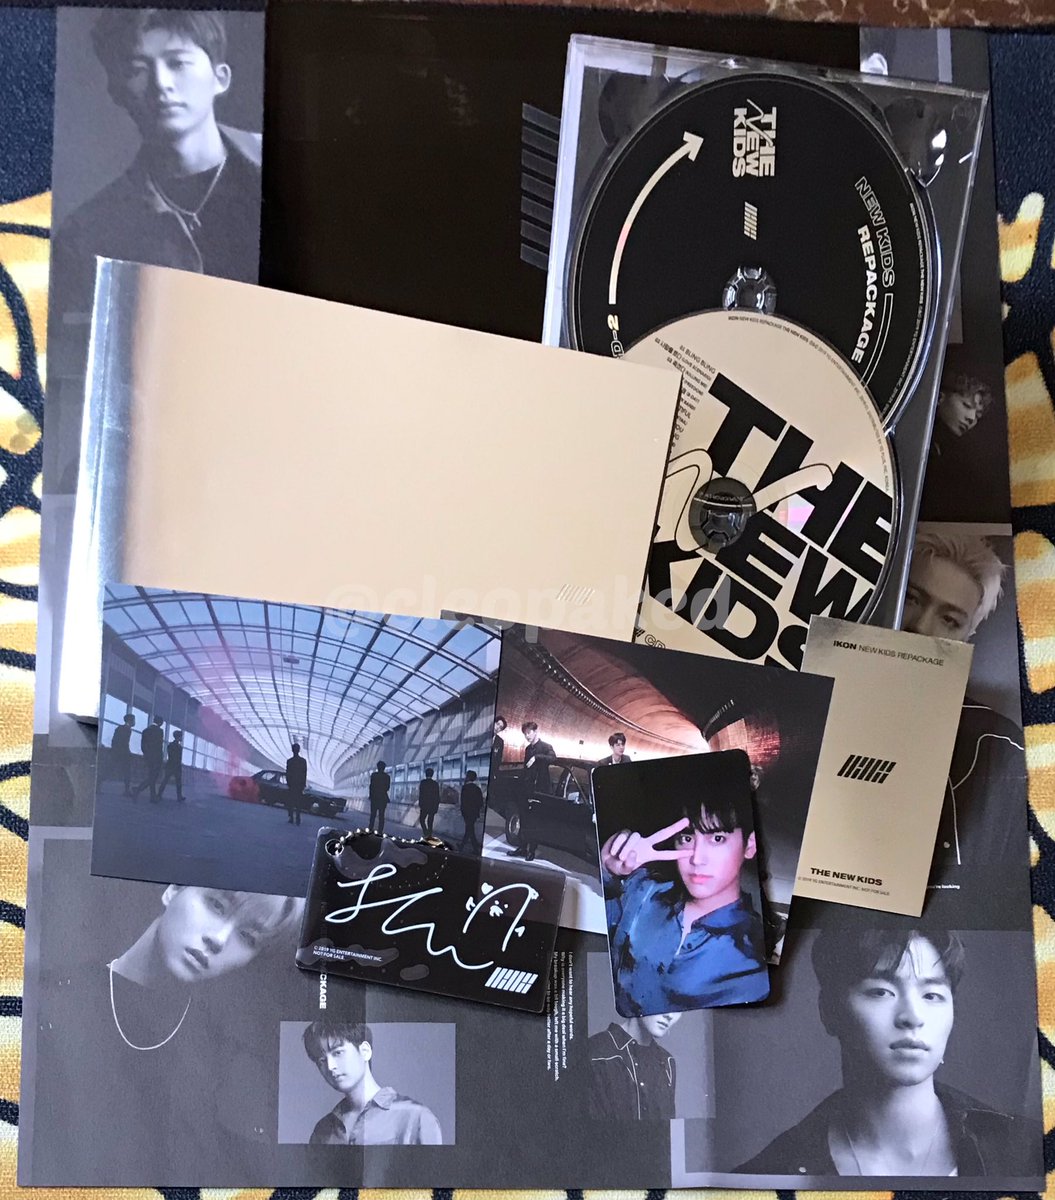 Ikon’s The New Kids Repackaged Album from  @sylviaaneoh . She’s such a sweetheart who’s willing to let go this wonderful album to me at a reasonable price. I can’t never thank you enough P/s: I’ll take a good care of Chanwoo 